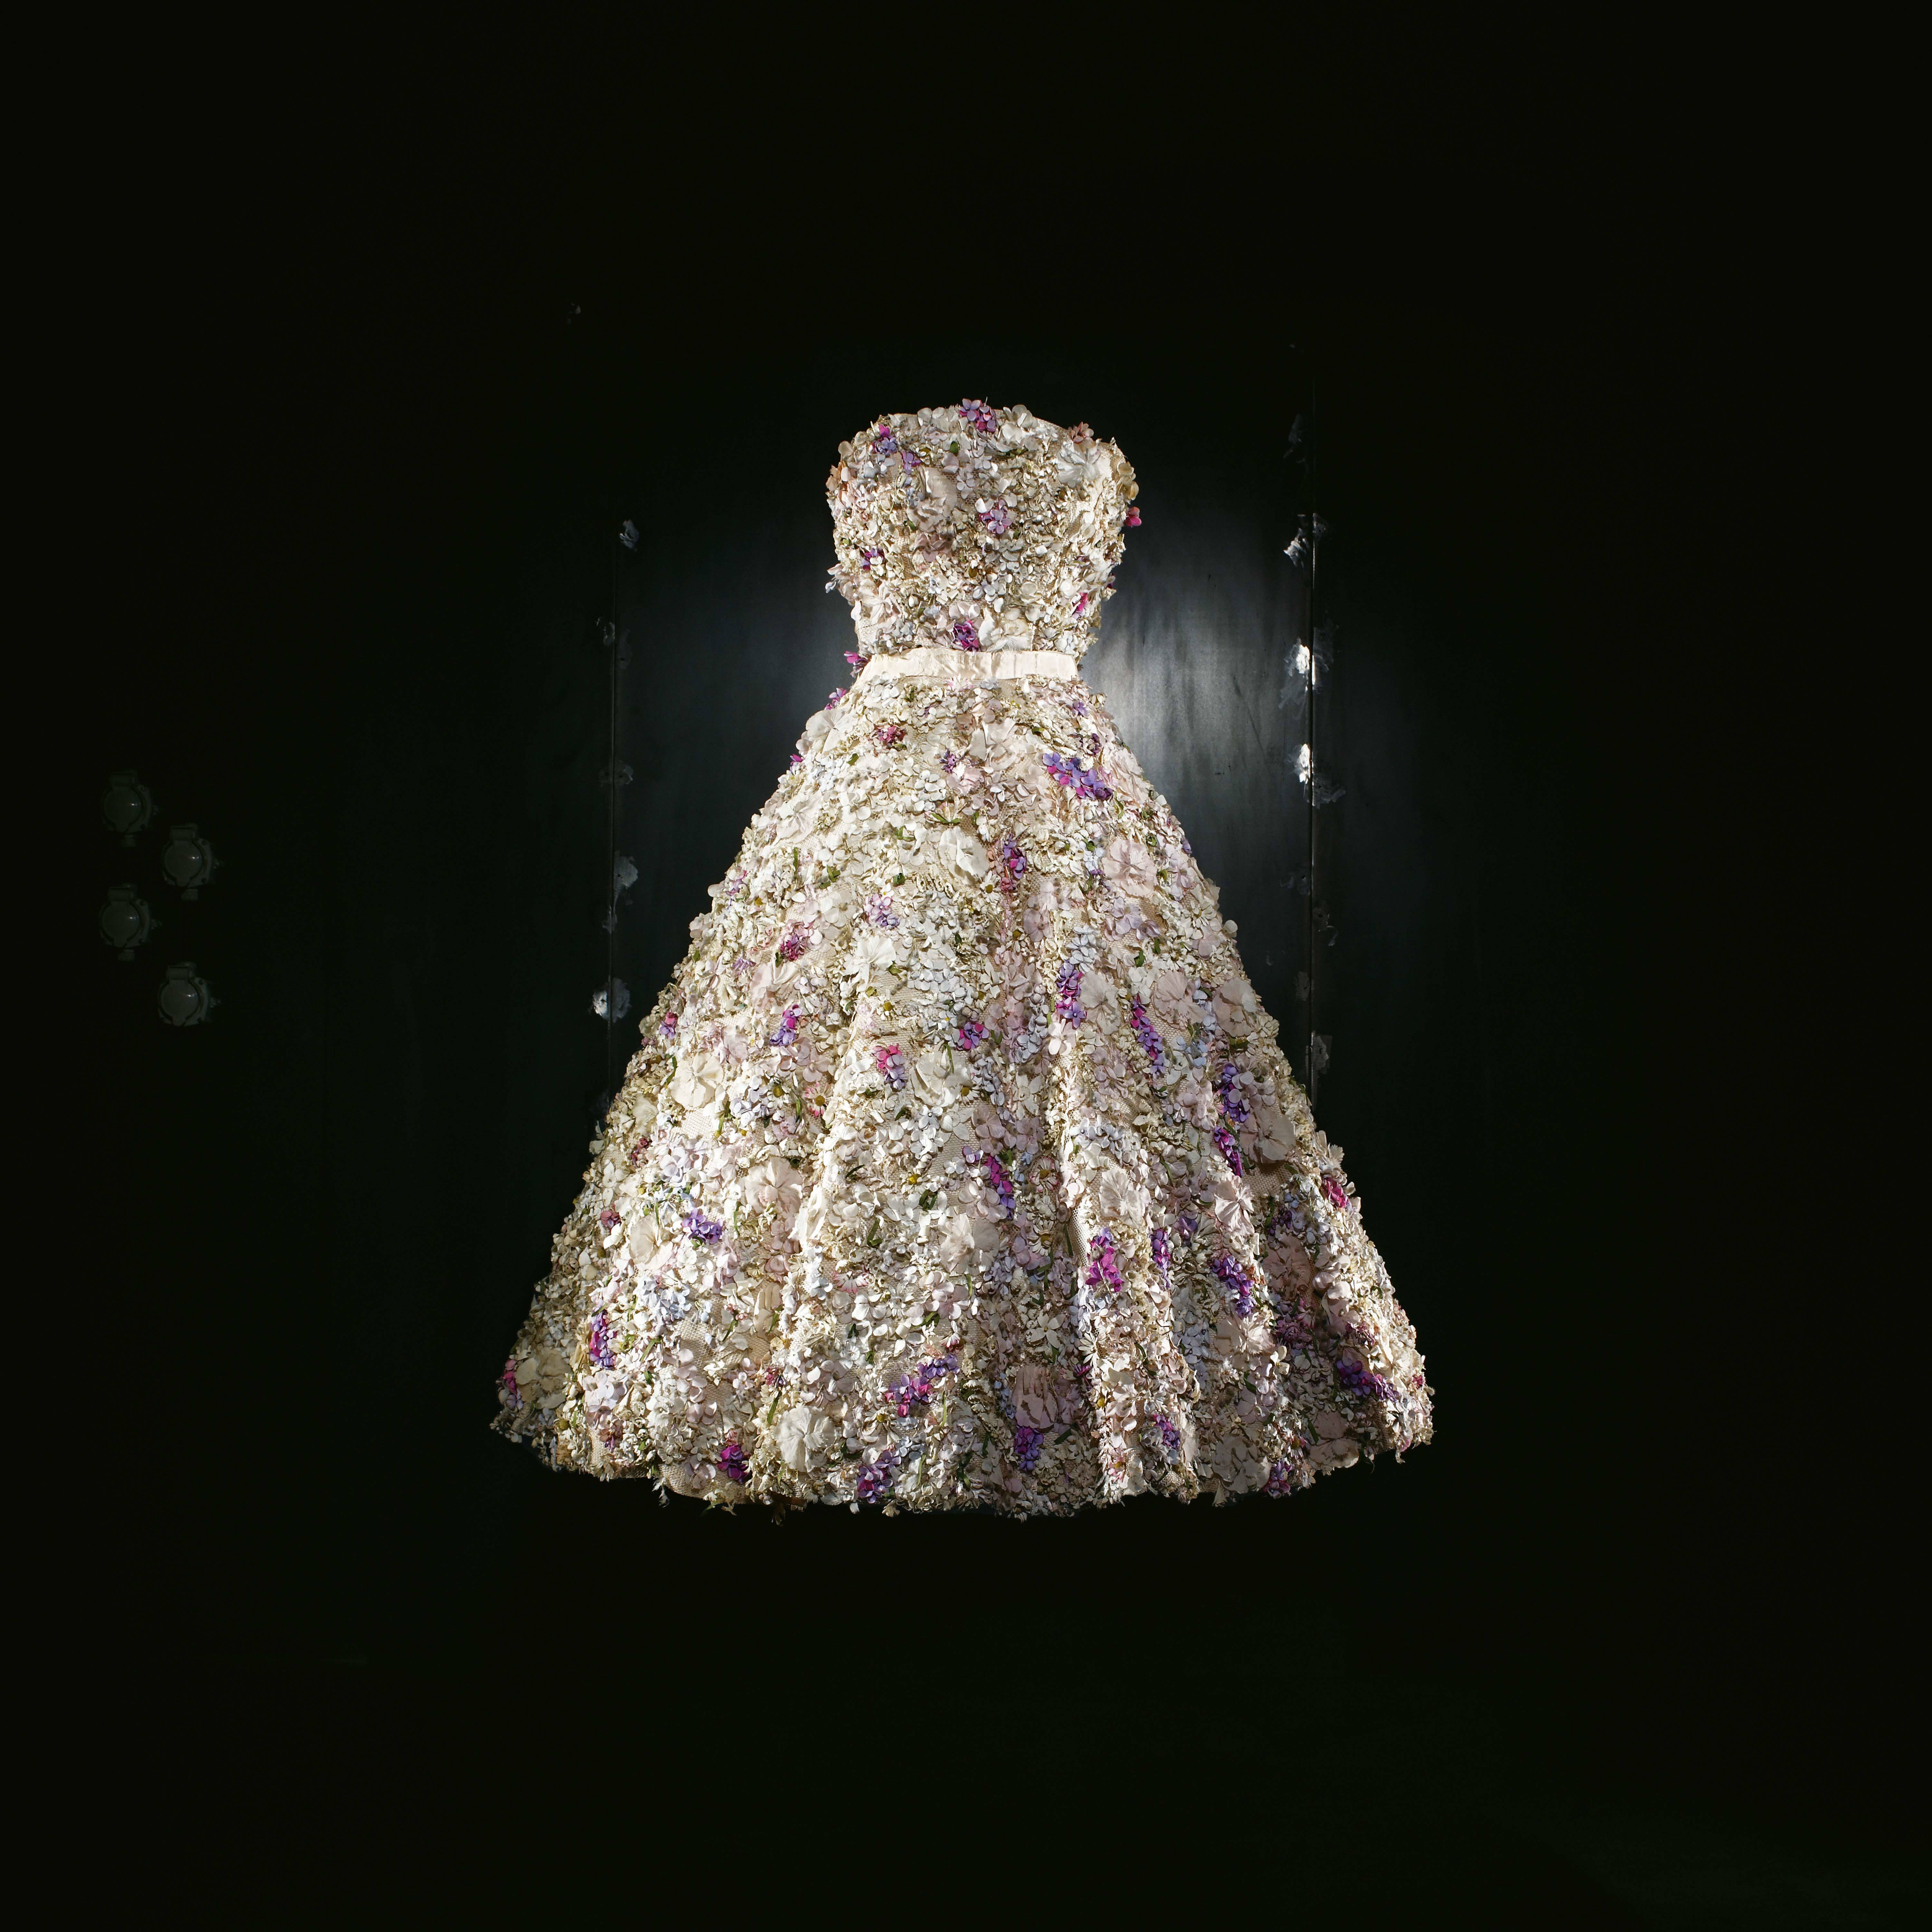 Christian Dior Rules Haute Couture for 70 Years - Interior Design